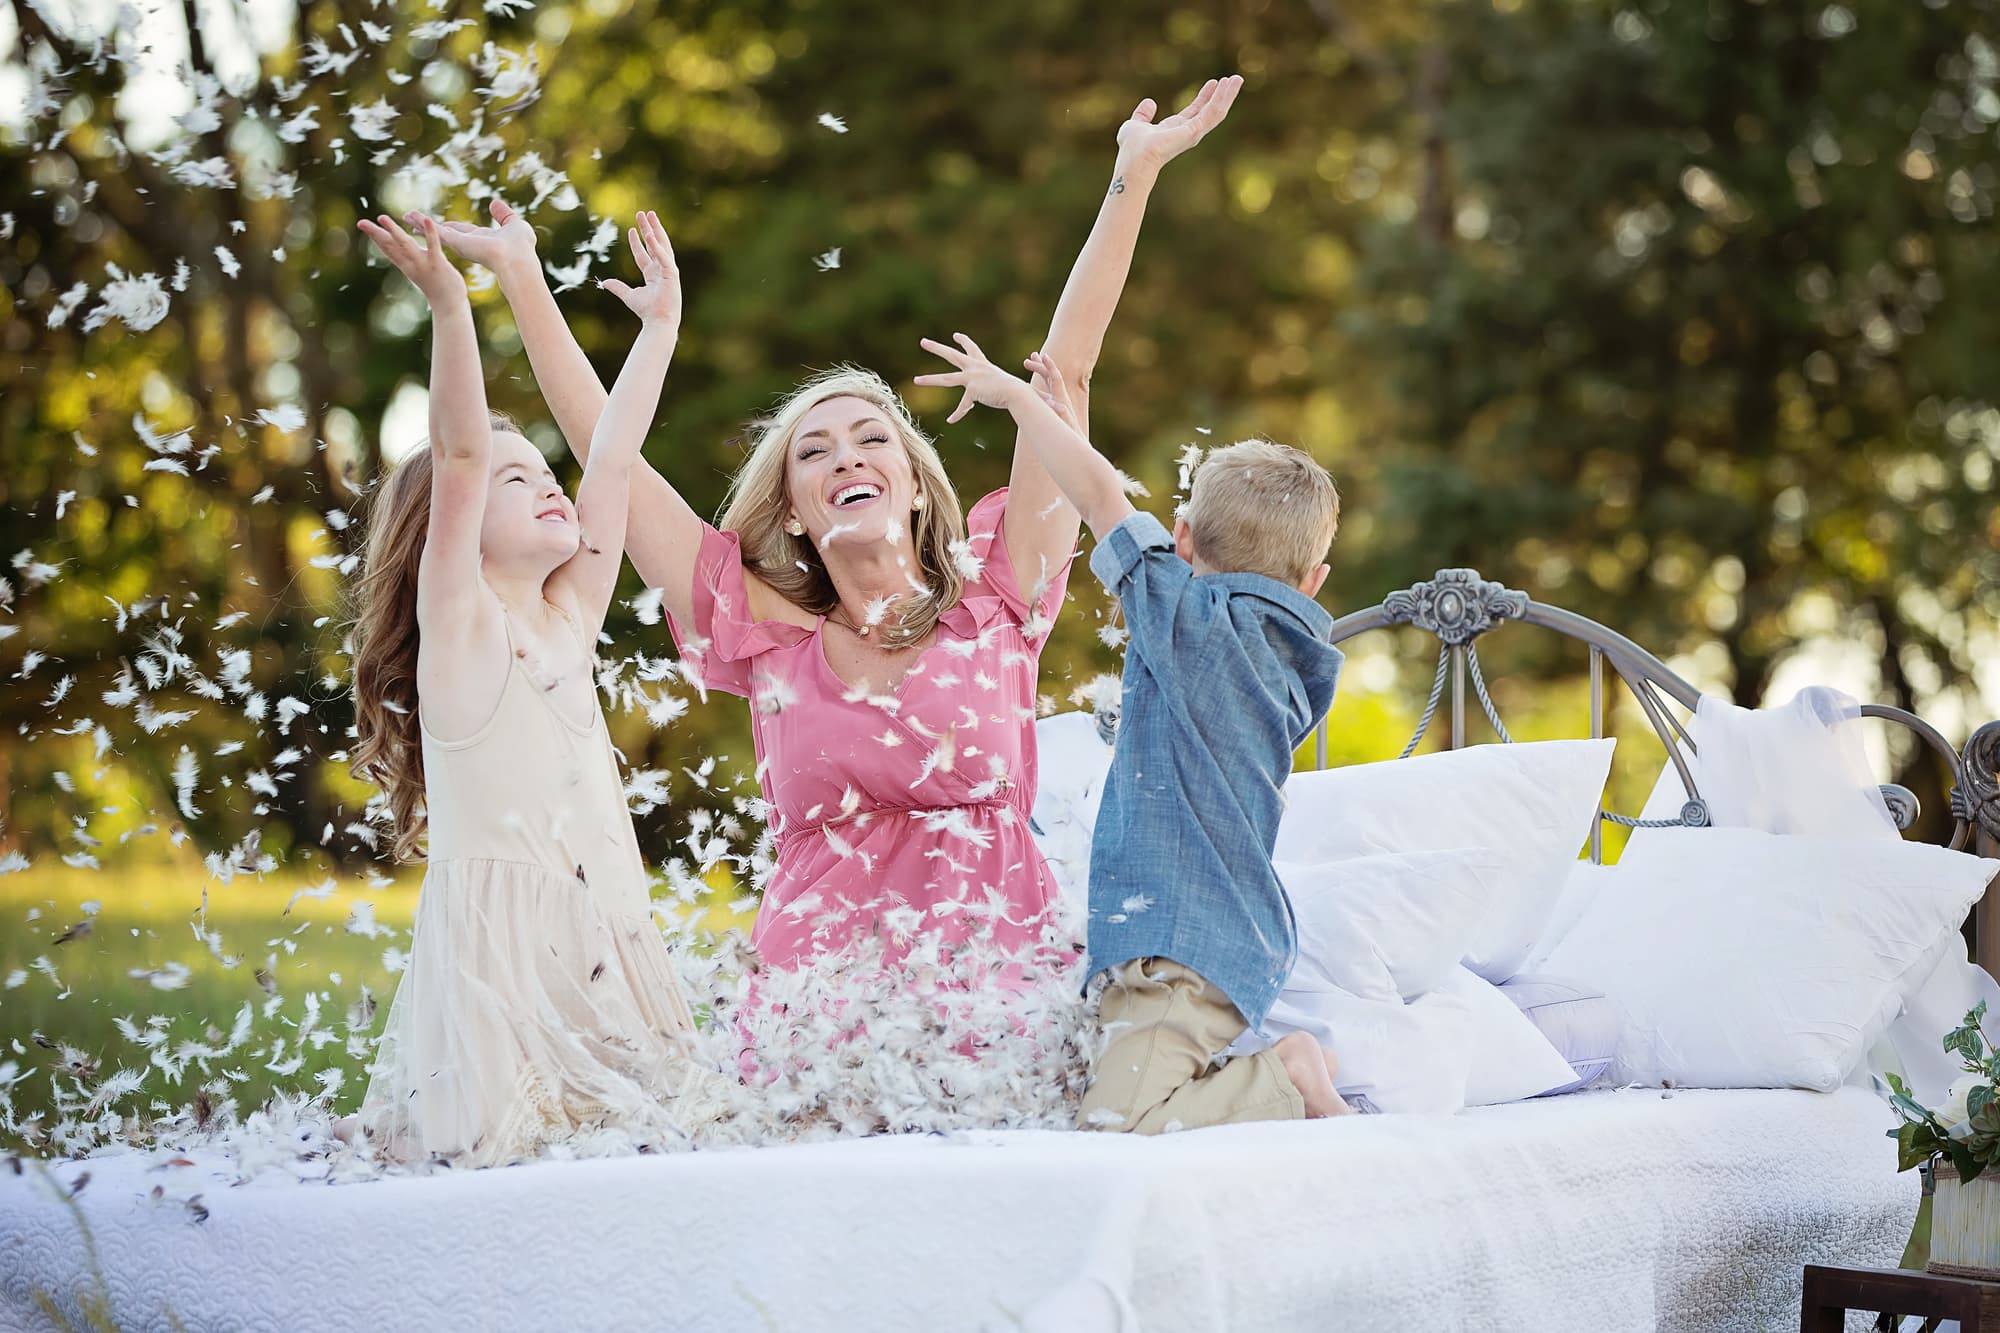 family feather pillow fight in field